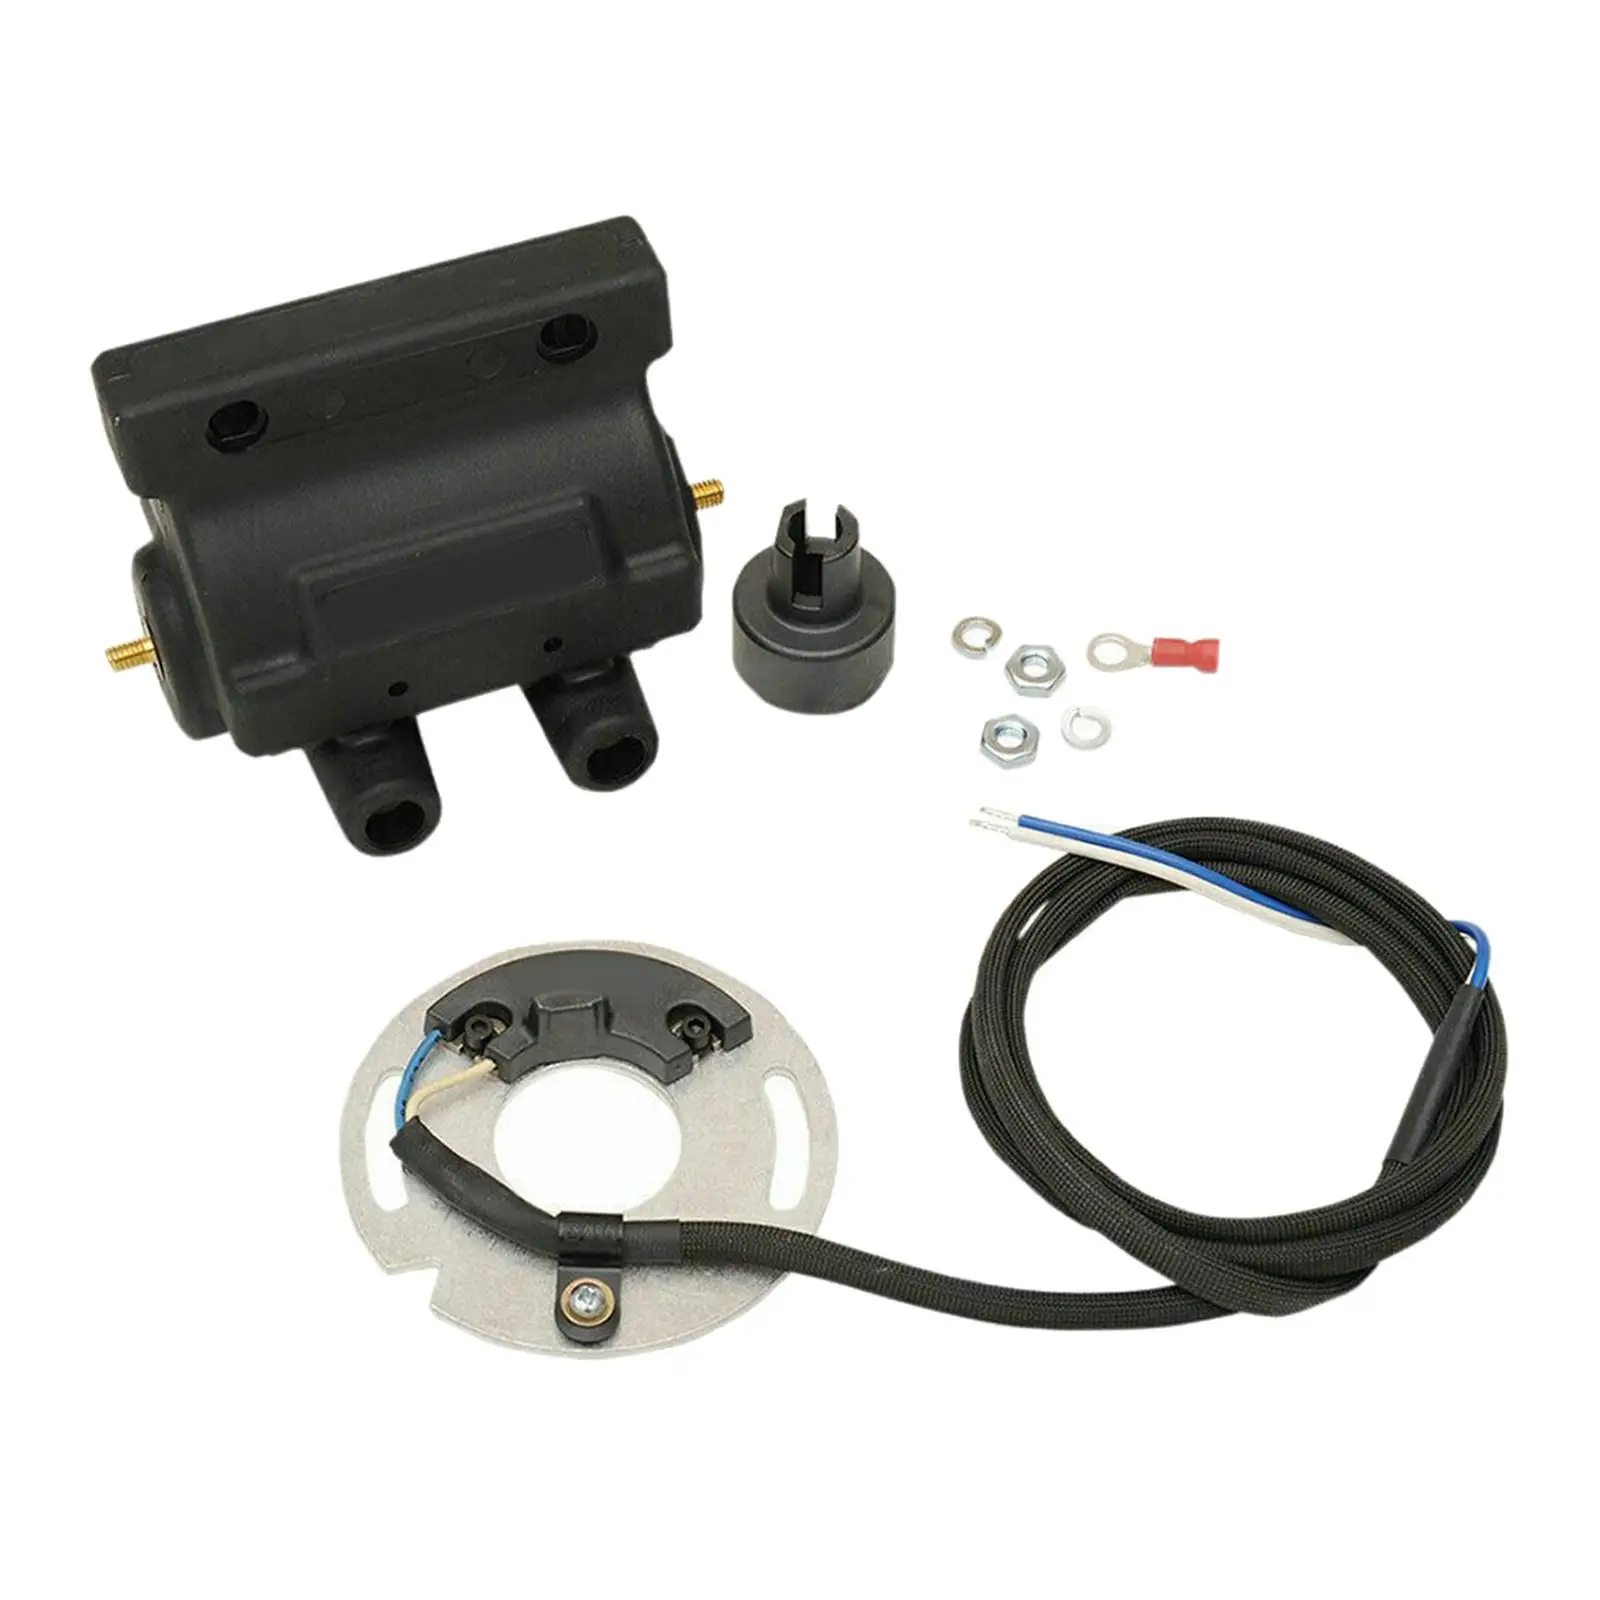 Ignition Dyna S Dual Fire Dsk61 Supplies Replaces Stable Performance Includes DC71 Coil Kit Accessories for Harley Davidson